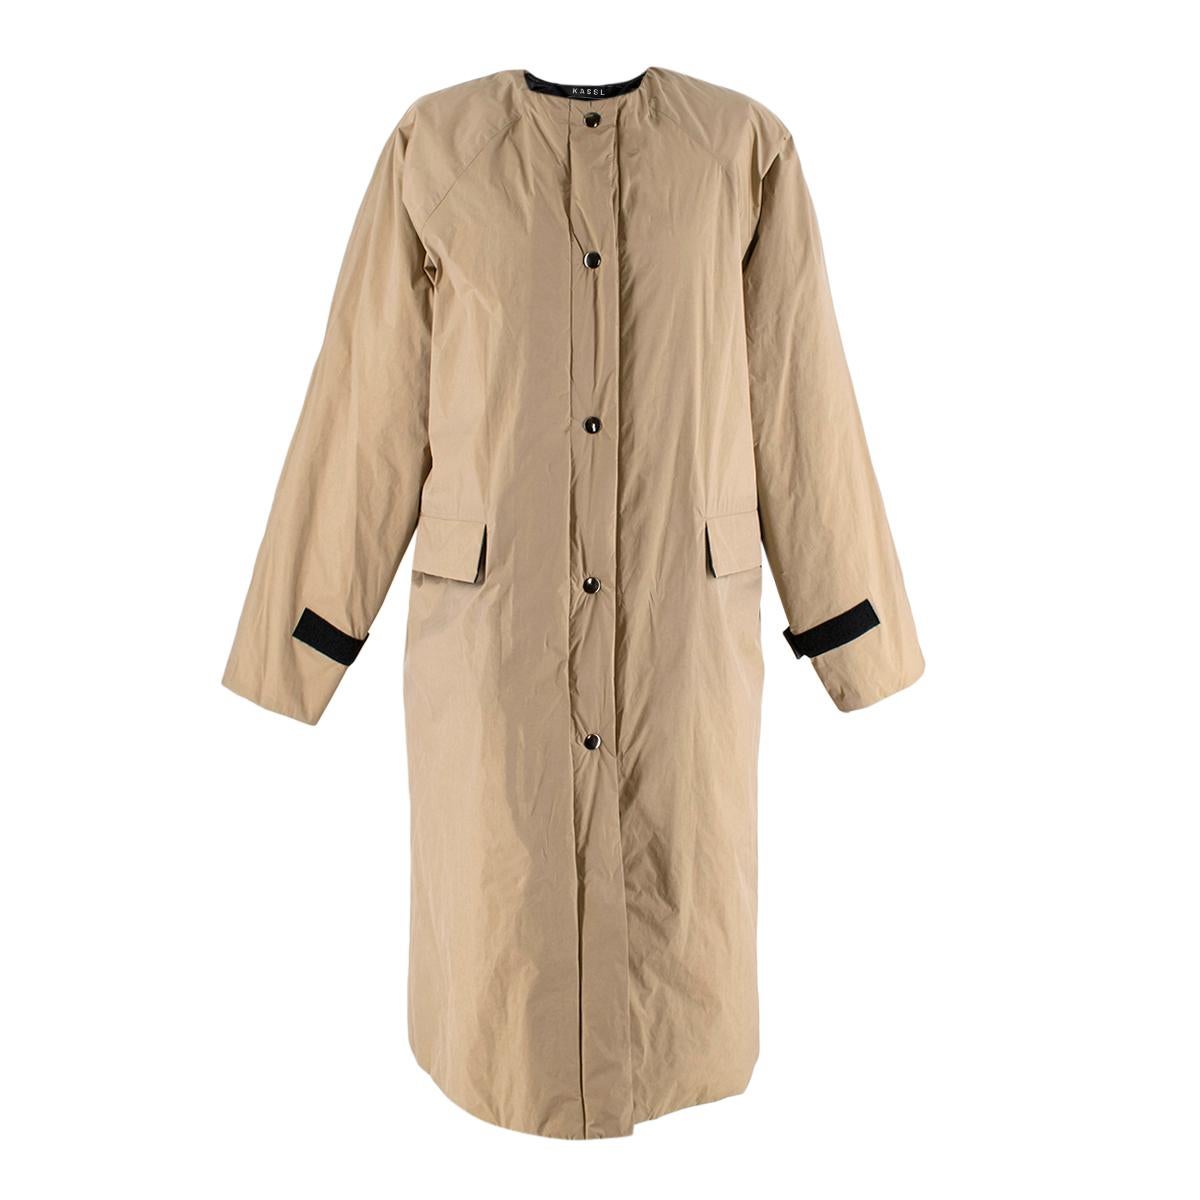 KASSL Editions Nude Coated Taffeta Padded Coat

- Elevated, industrially inspired lightly padded collarless coat
- Light camel colour, reflecting tones of khaki, gold and brown
- Contrasting black interior, zip, front poppers and velcro cuff